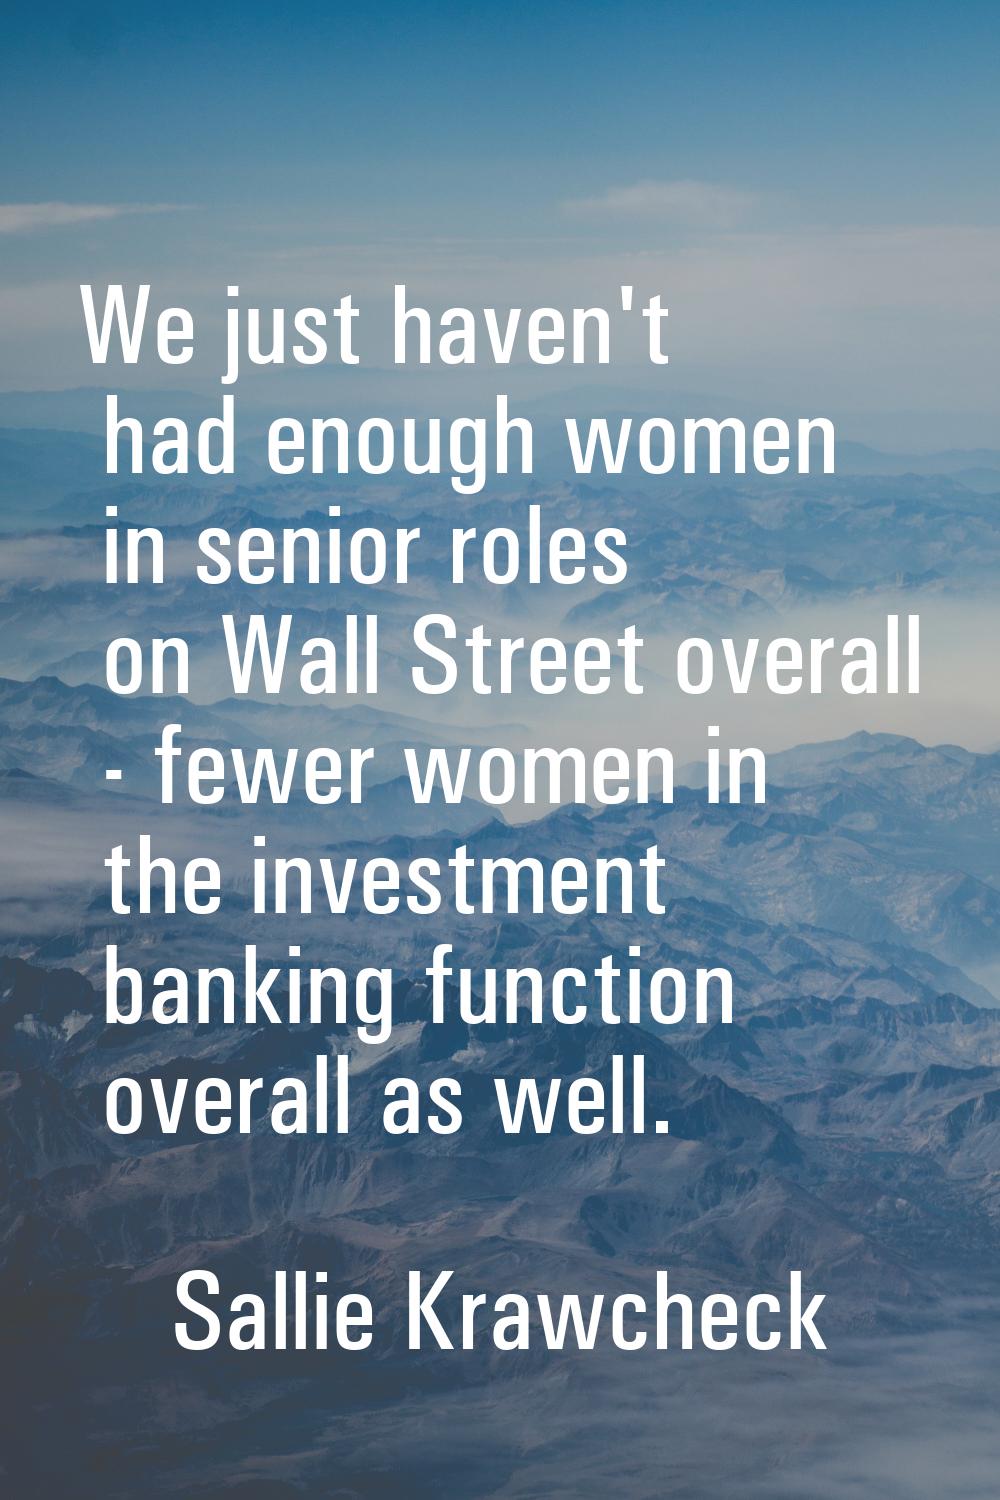 We just haven't had enough women in senior roles on Wall Street overall - fewer women in the invest